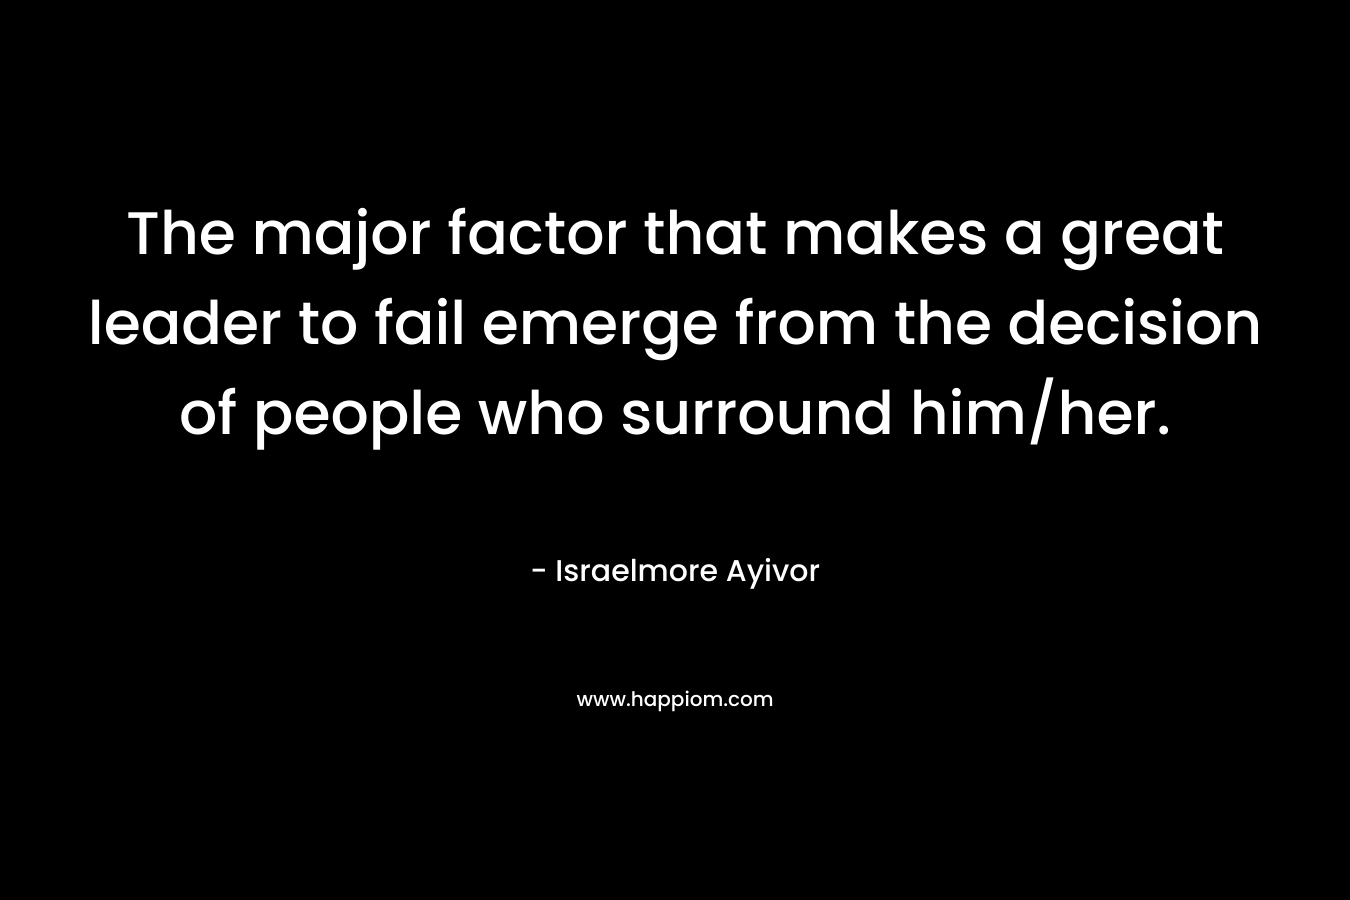 The major factor that makes a great leader to fail emerge from the decision of people who surround him/her. – Israelmore Ayivor